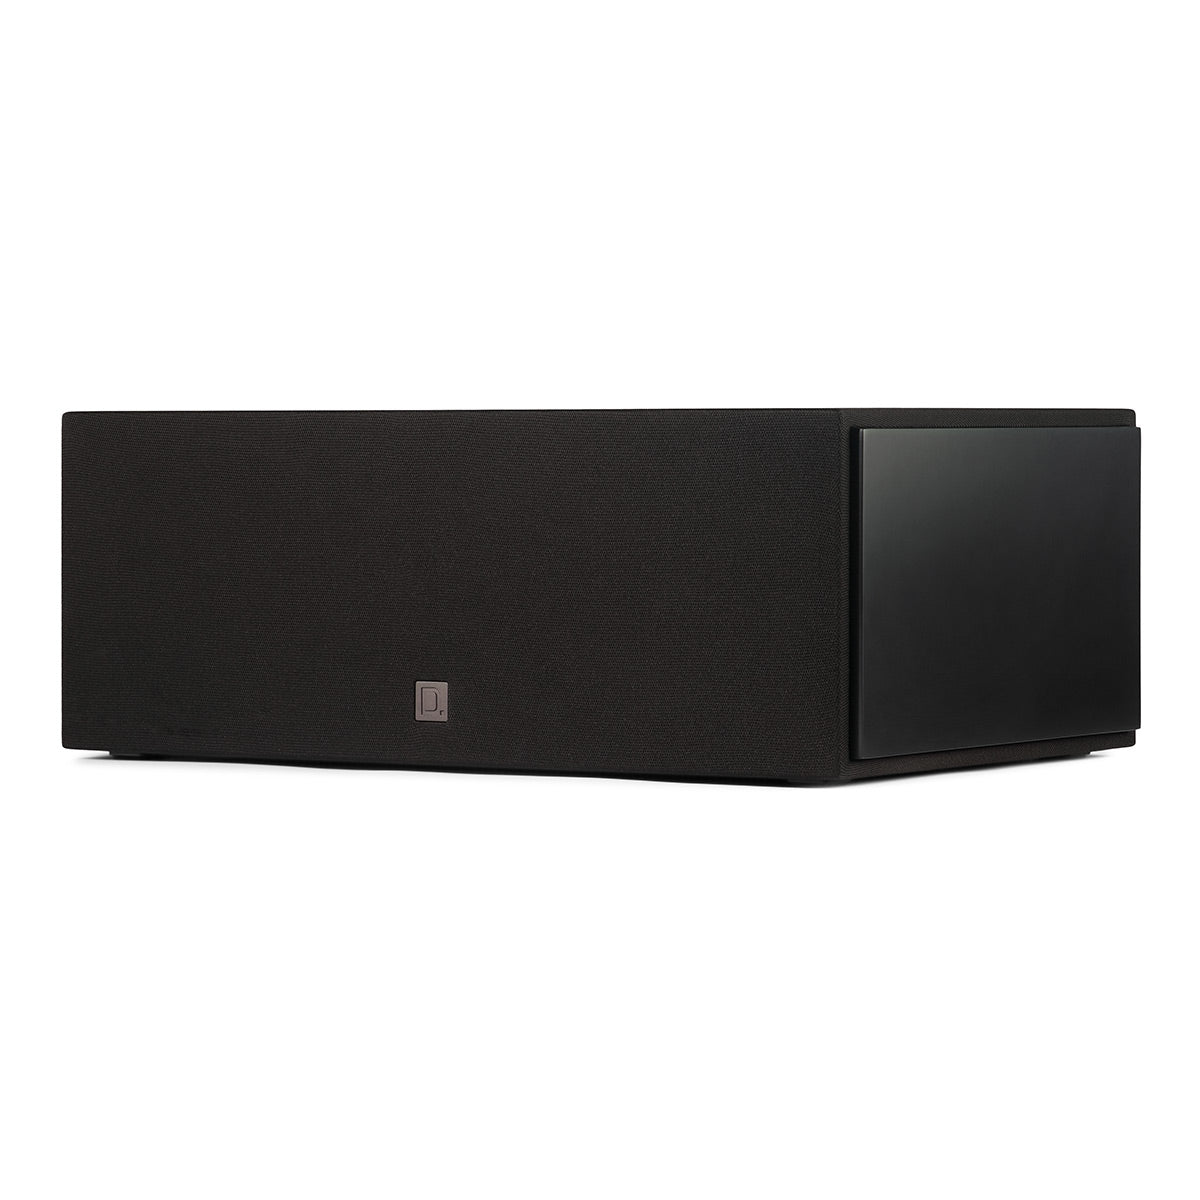 Definitive Technology Dymension DM10 Compact Center Channel Speaker with Integrated Passive Radiator